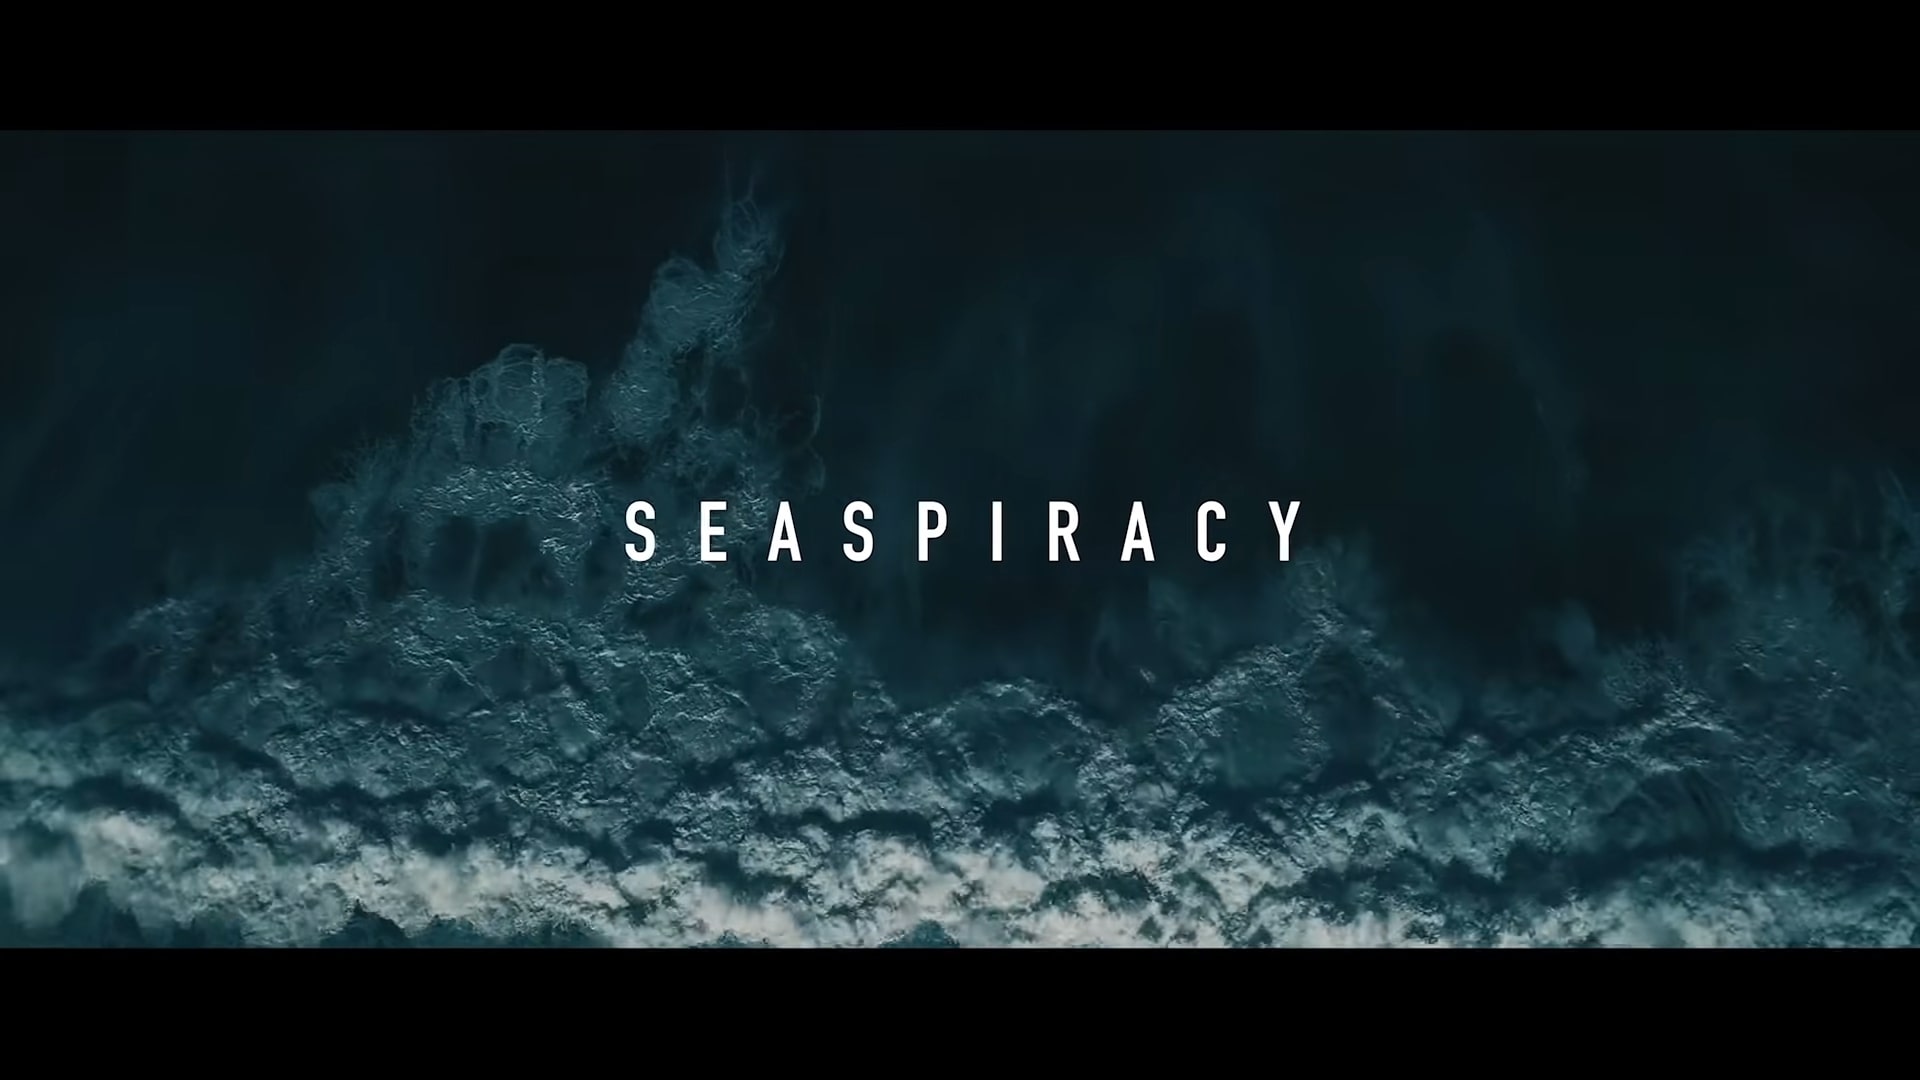 Seaspiracy Netflix Documentary Film, Coming to Netflix in March 2021